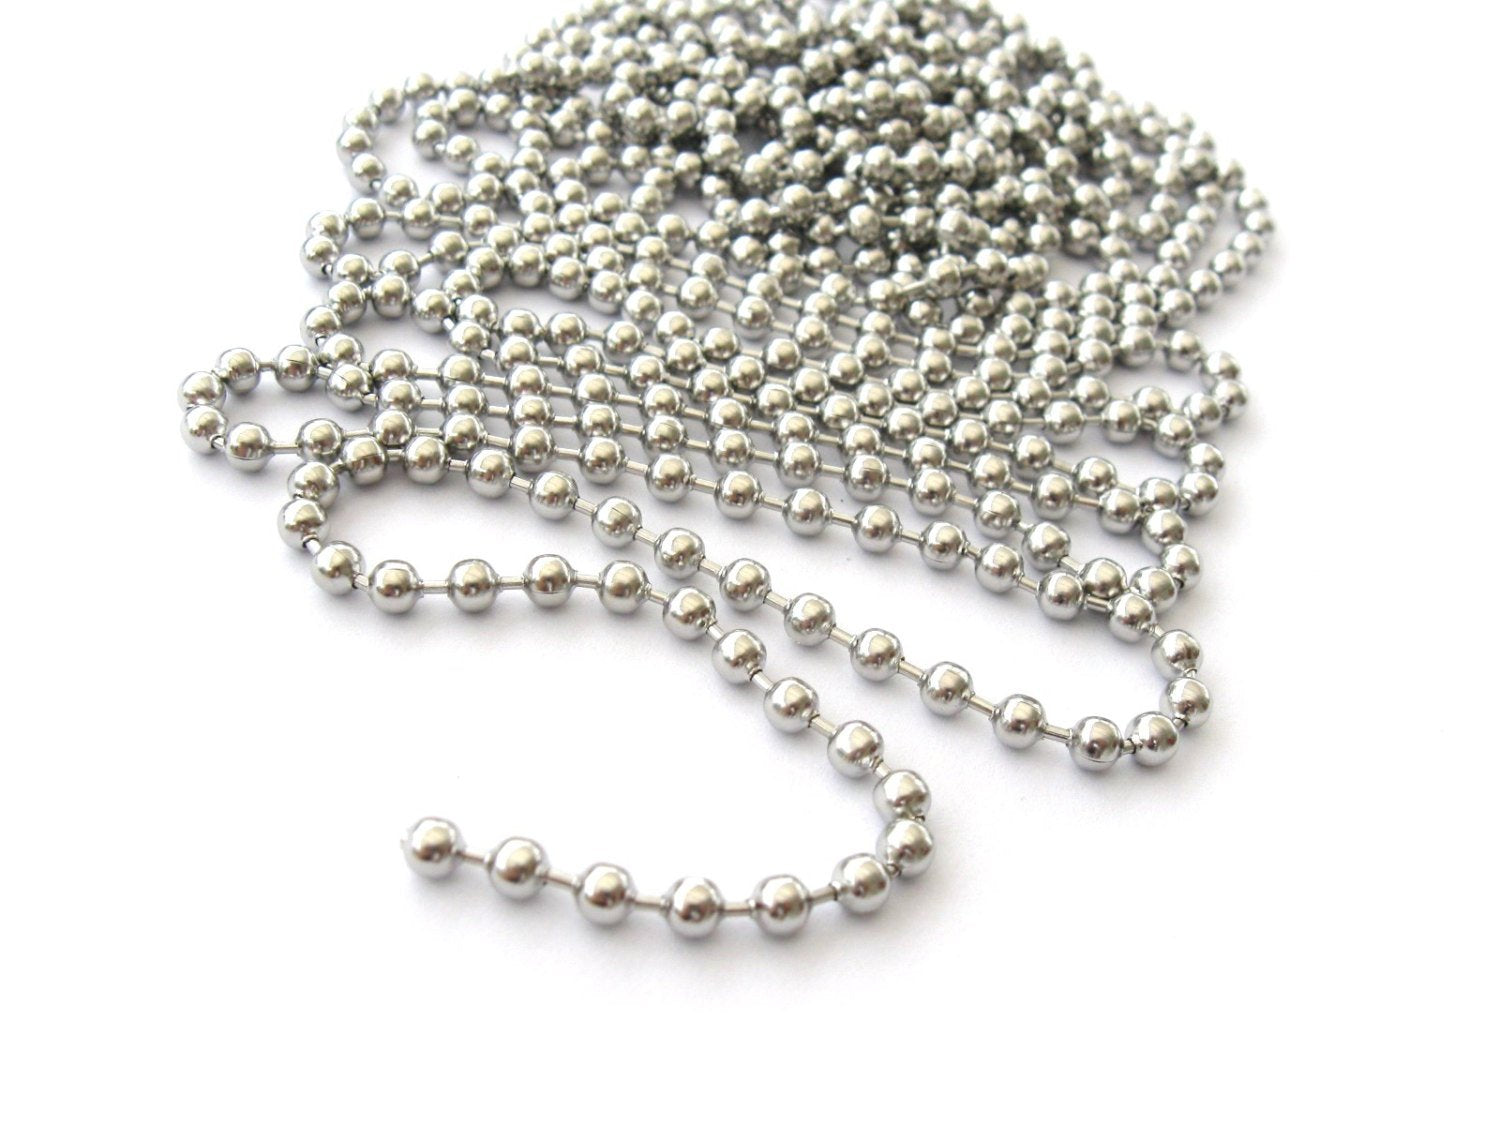 Wholesale 304 Stainless Steel Ball Chain Connectors 